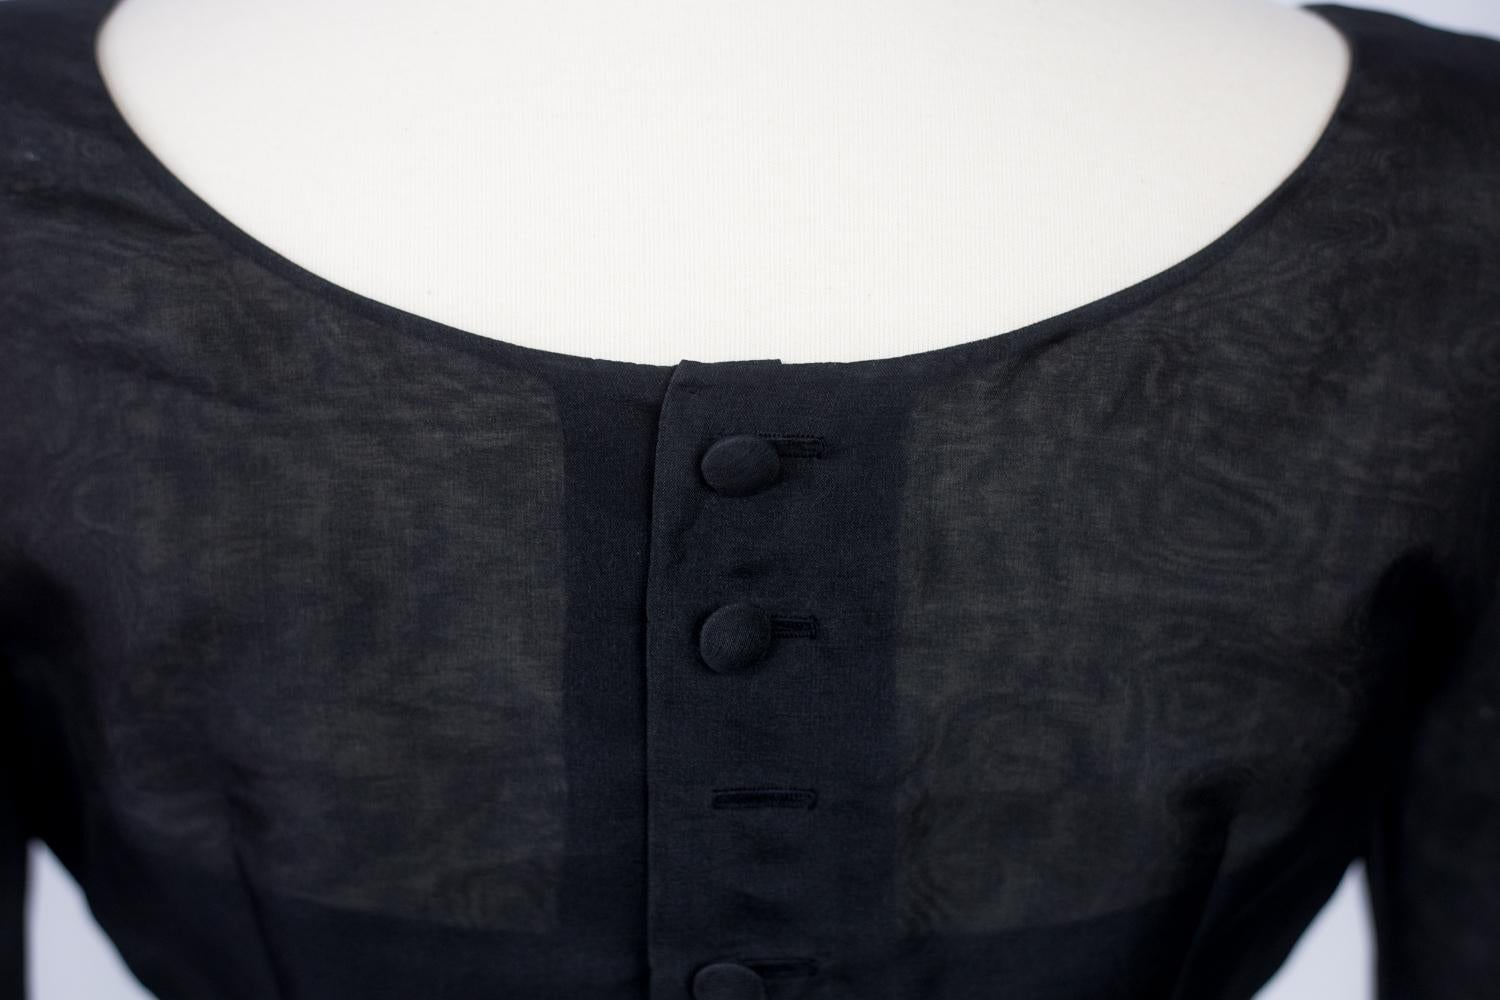 A Pierre Cardin Organza Blouse With Dramatic Batwing Sleeves Circa 1970/1980 For Sale 4